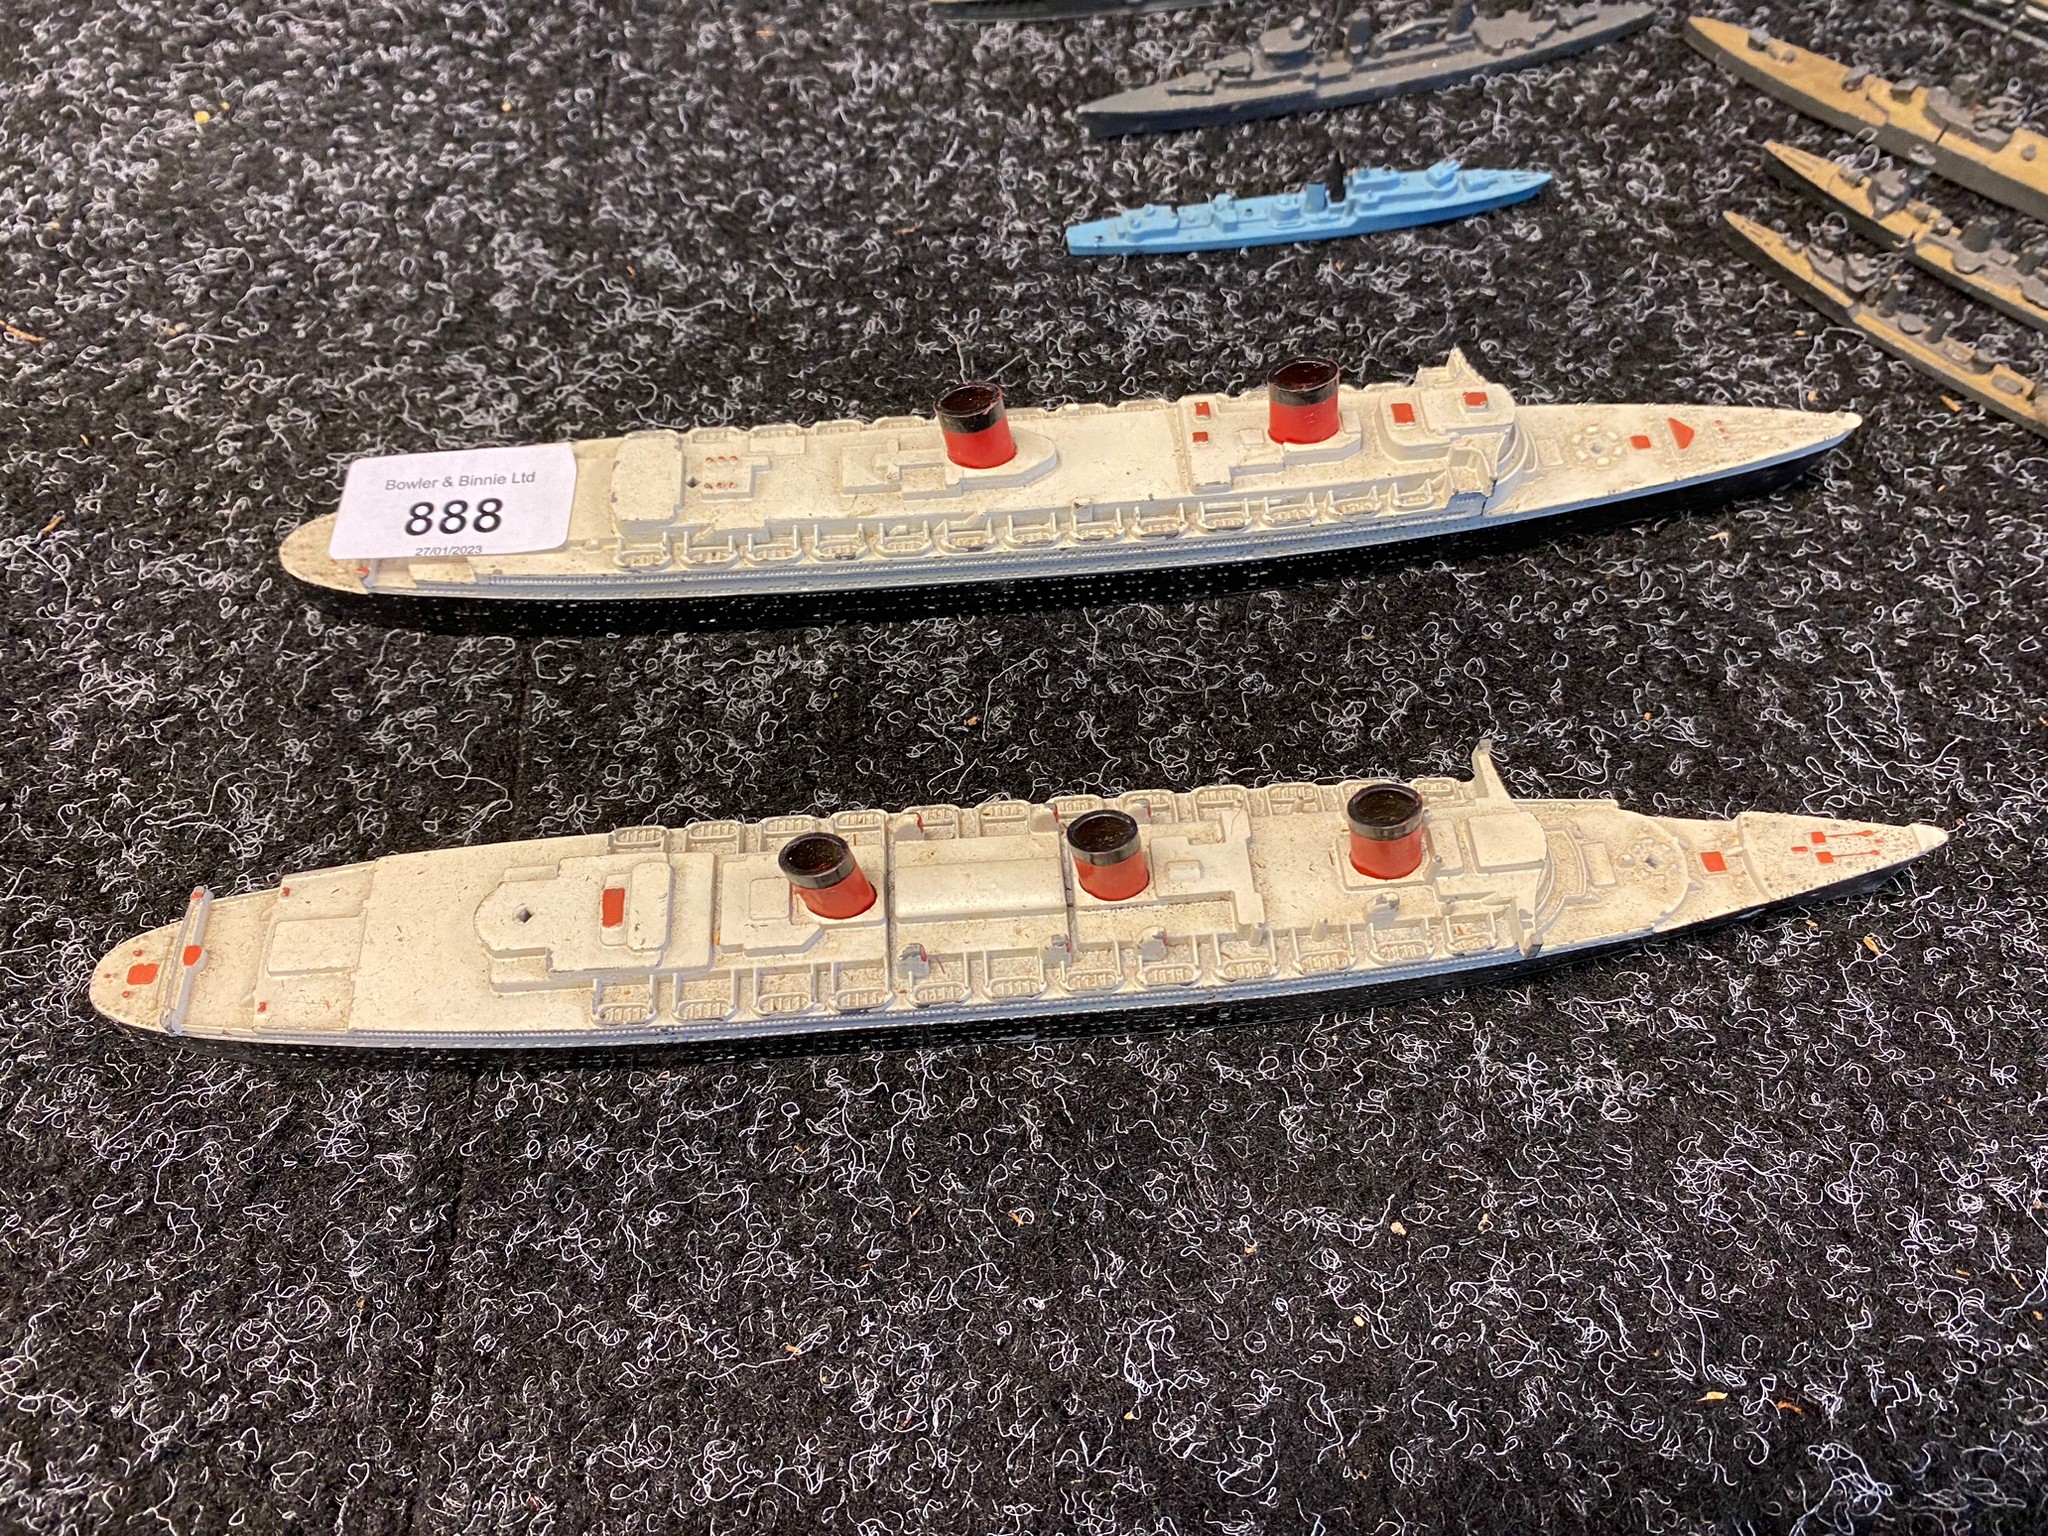 A Collection of British Tri ang mimic ships to include RMS queen Elizabeth and RMS queen Mary . - Image 4 of 5